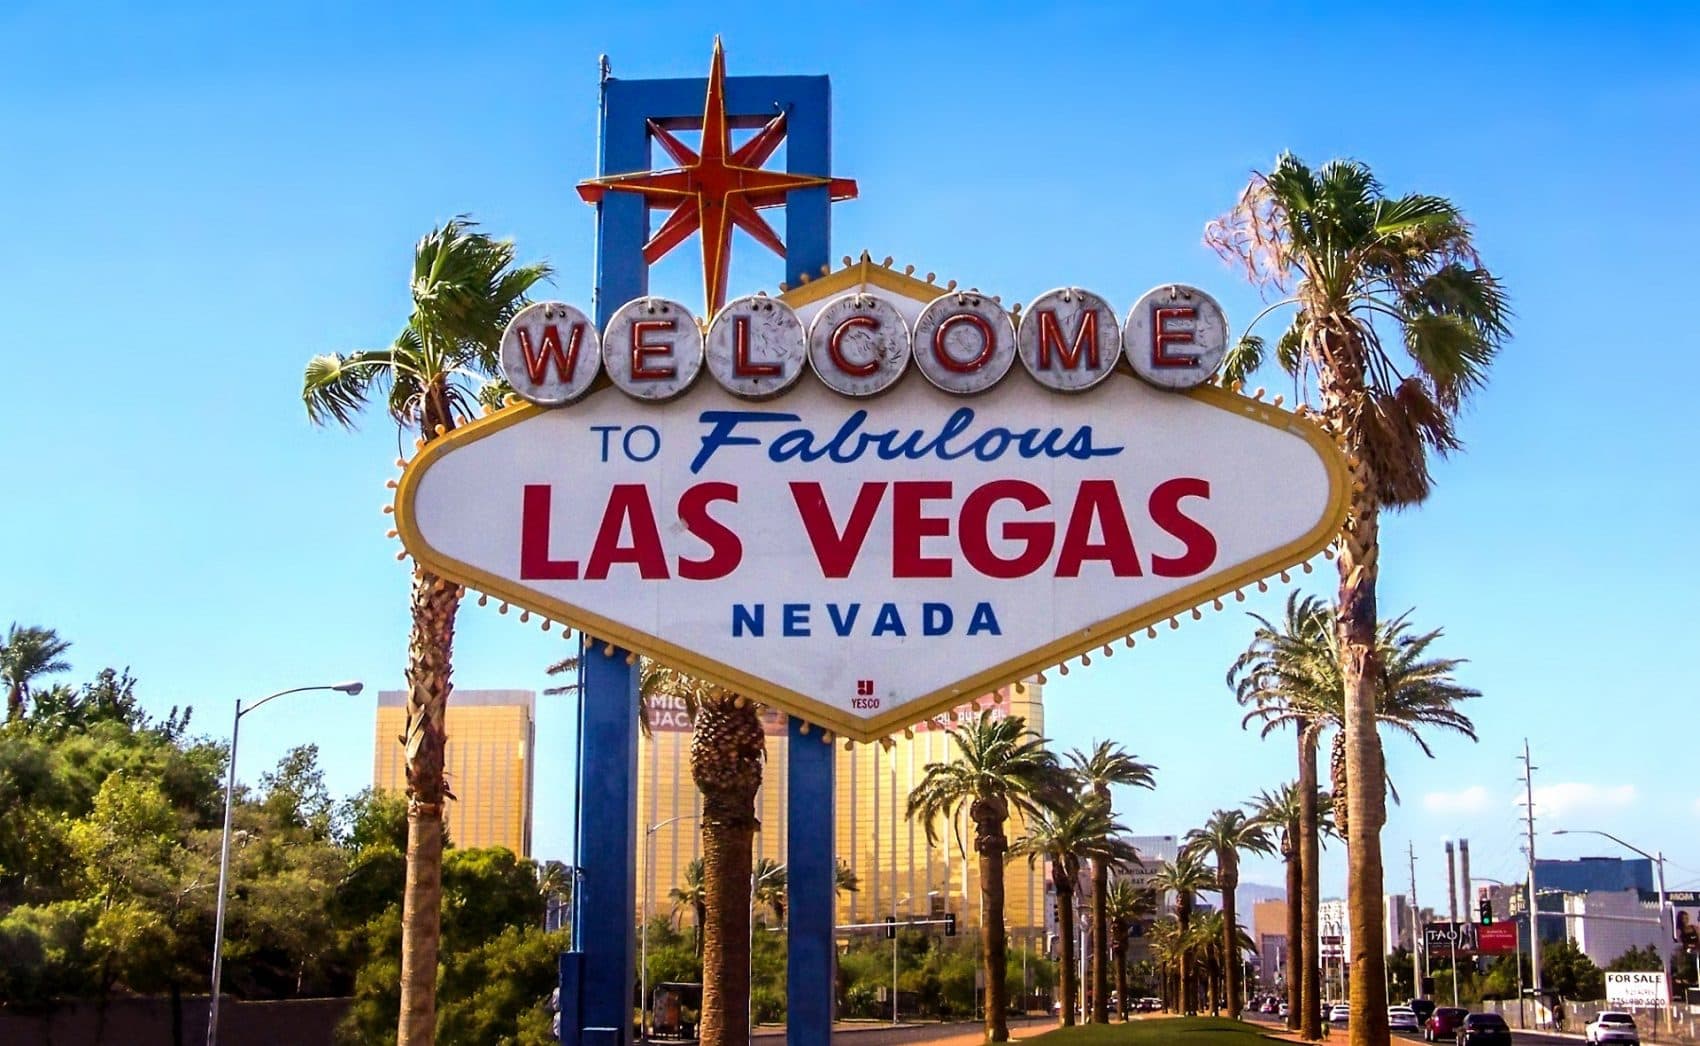 Las Vegas Residencies: A History Of Sin City And Music